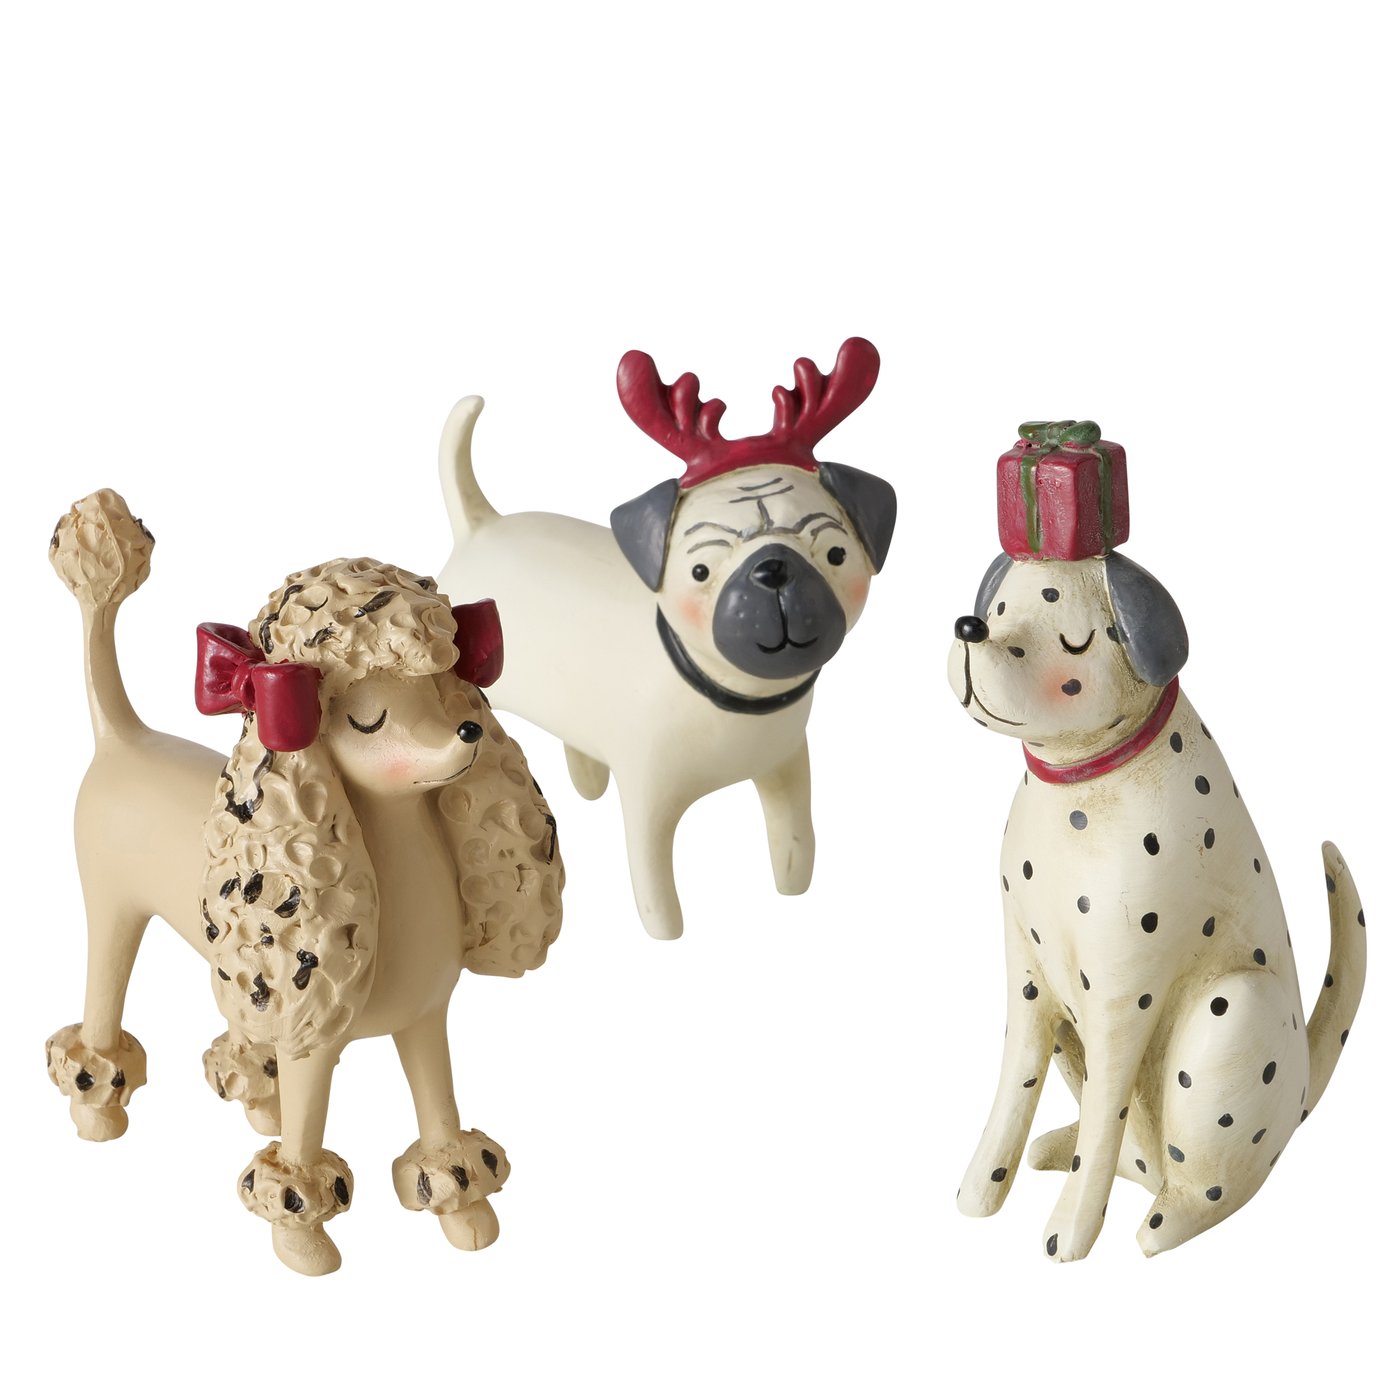 &Quirky Yule Dog Standing Ornament : Pug, Dalmatian or Poodle